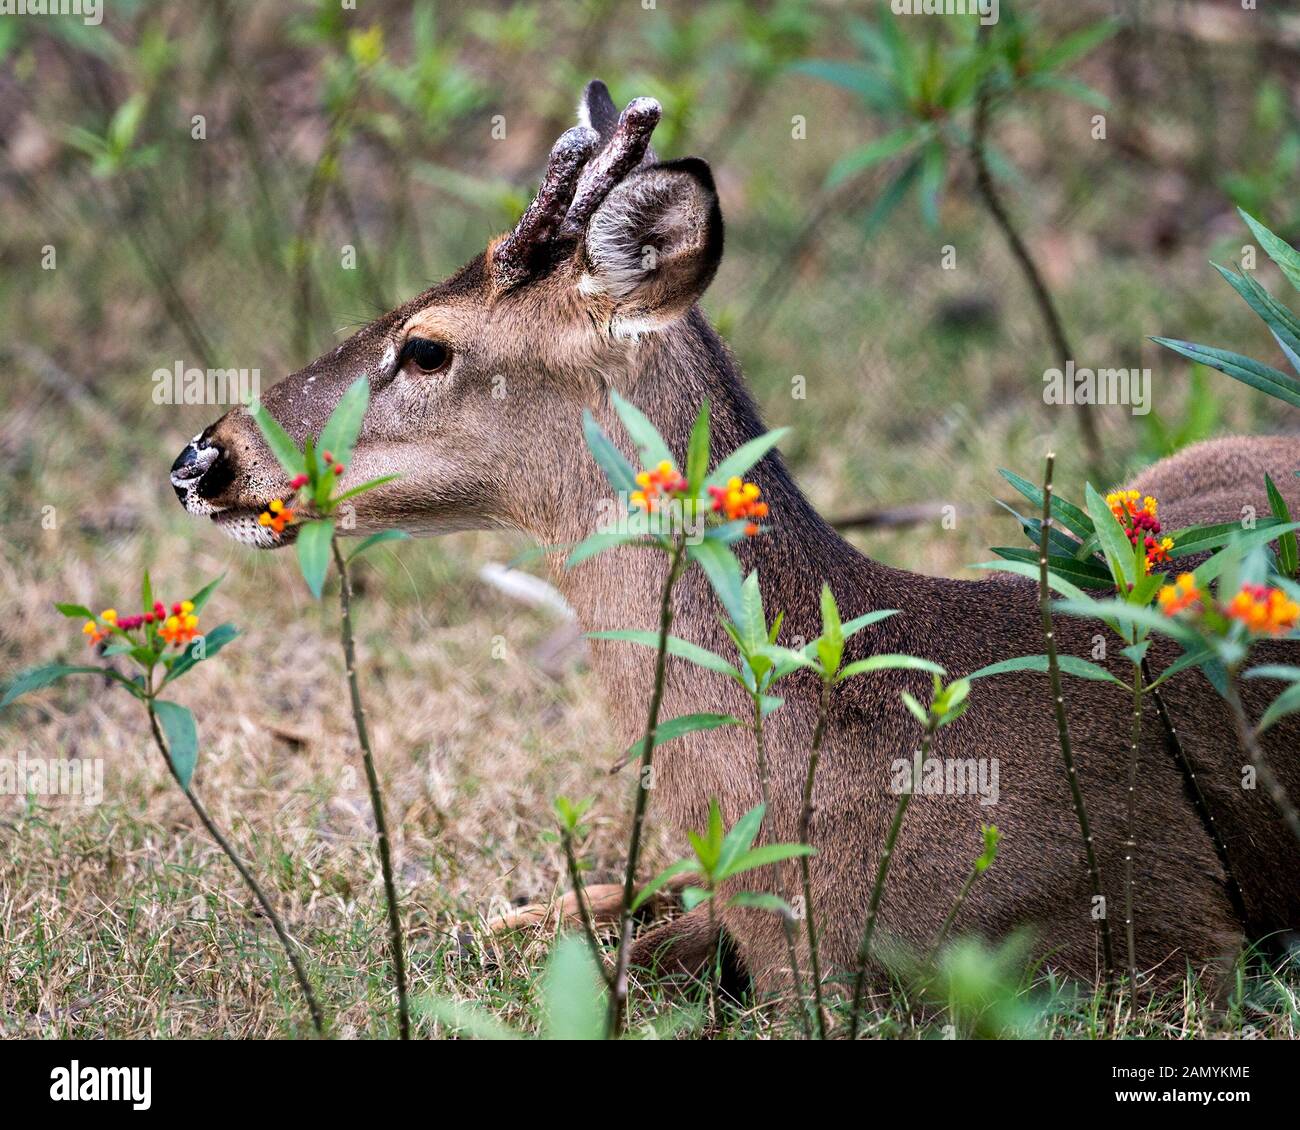 Deer animal close-up view displaying head, brown fur, antlers, ears, eyes, nose, legs with wildflowers foreground and bokeh backgroun in its environme Stock Photo